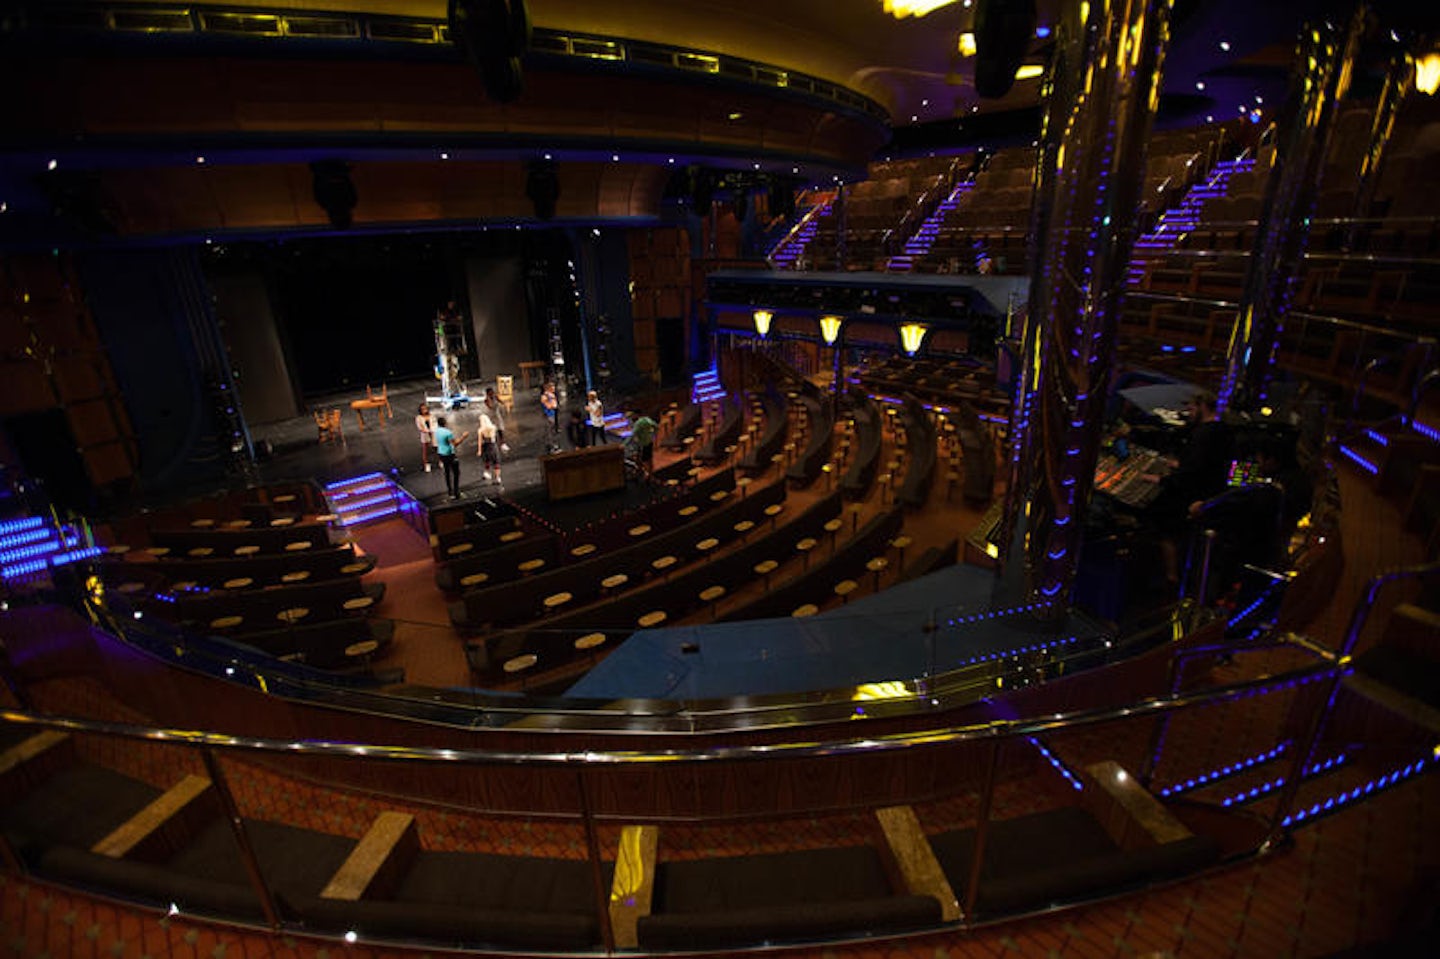 Ovation Theater on Carnival Breeze